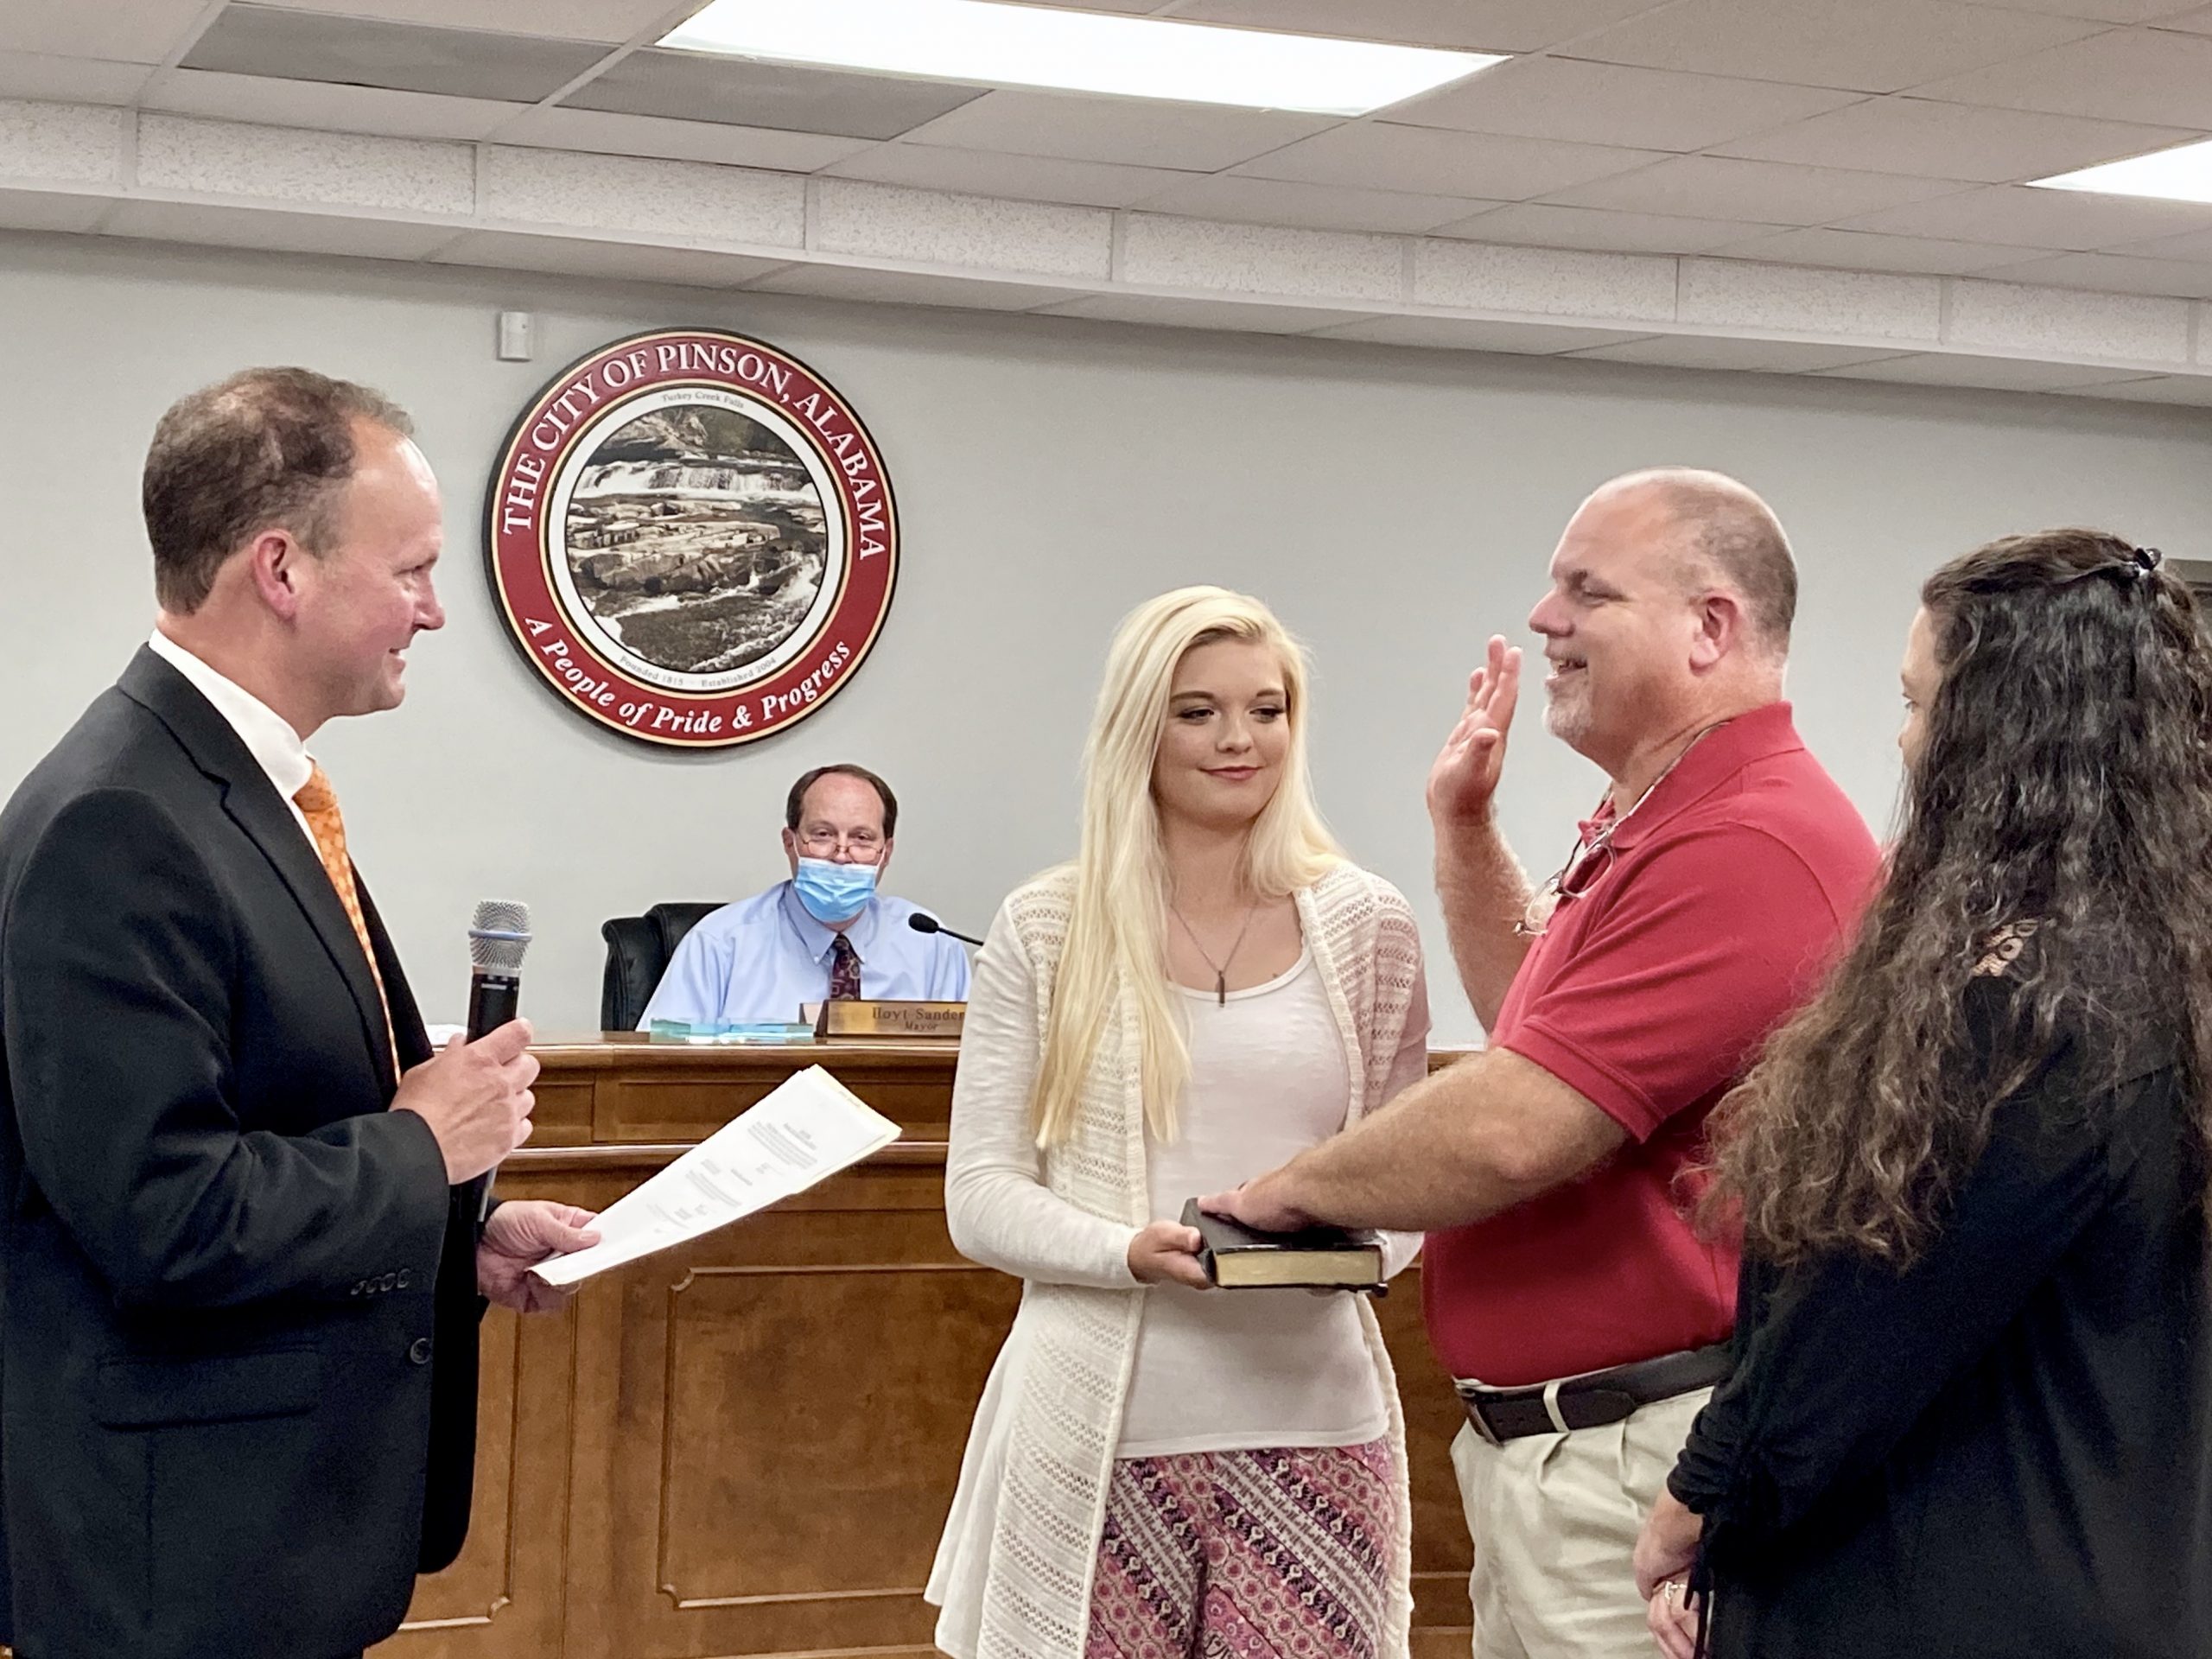 Pinson Council swears in Brad Walker to fill Place 2 vacancy